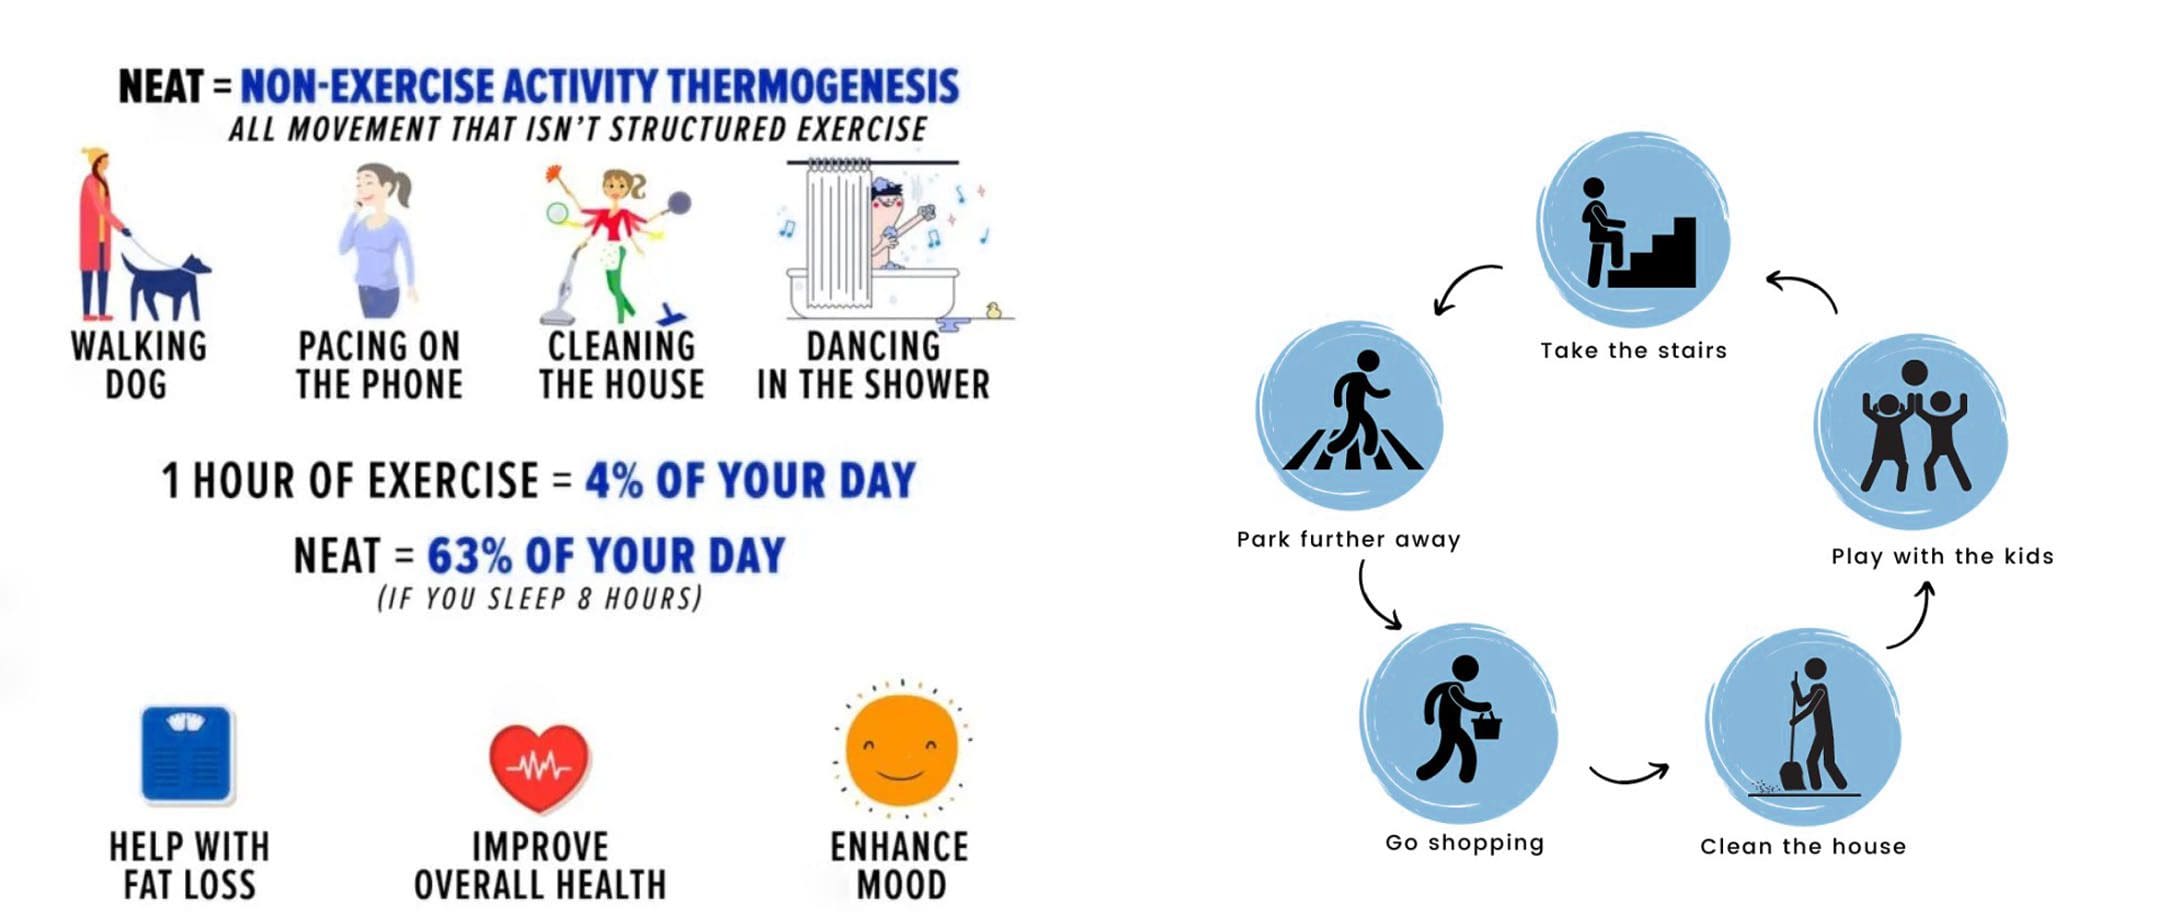 Non-Exercise Activity Thermogenesis: An Easy Guide